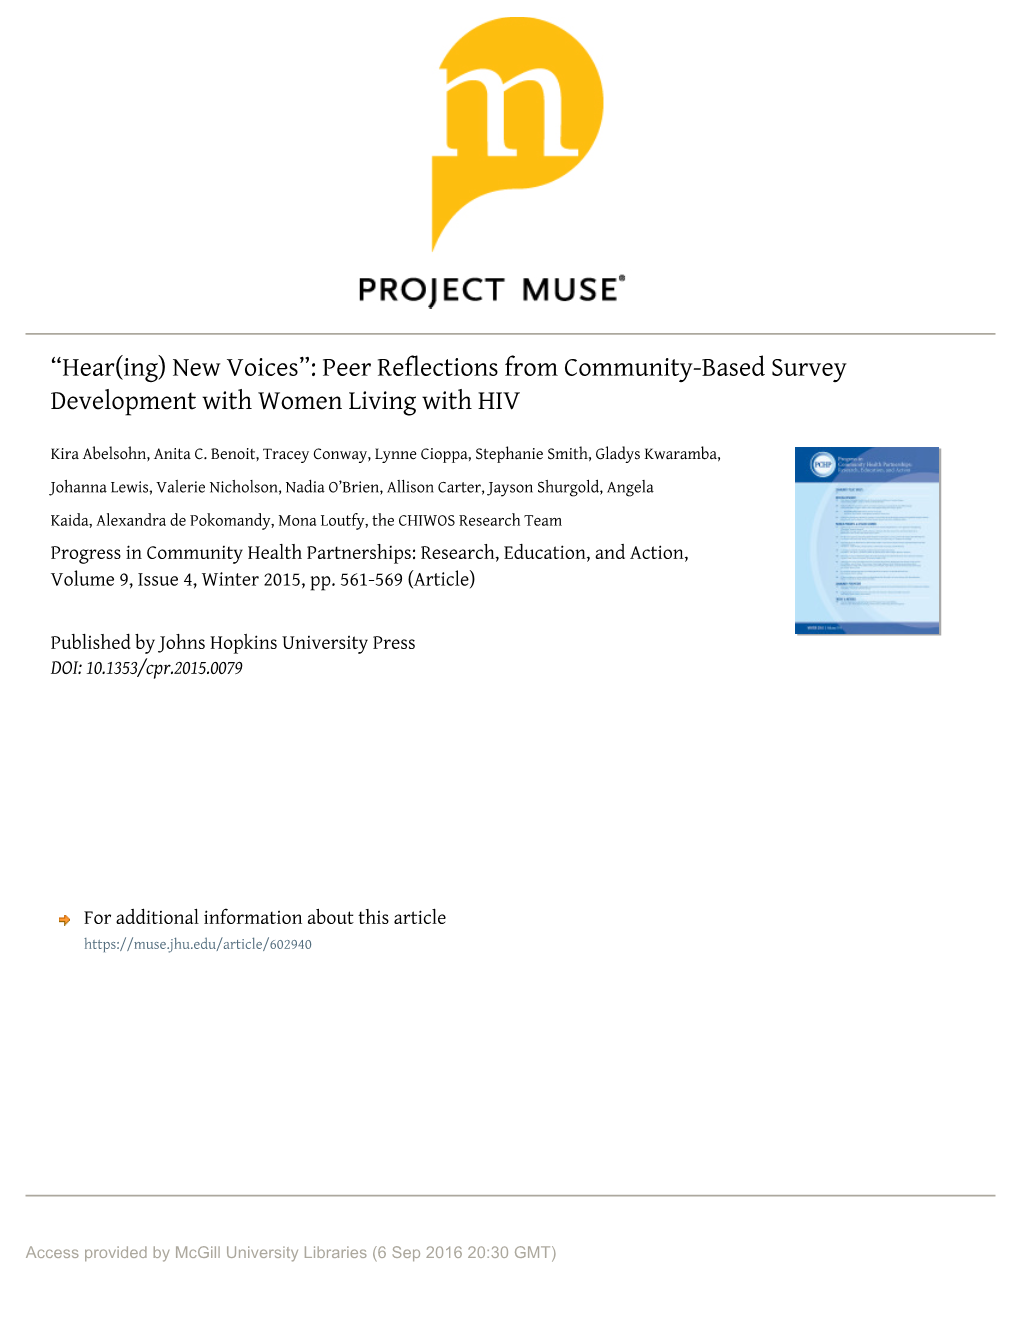 Peer Reflections from Community-Based Survey Development with Women Living with HIV